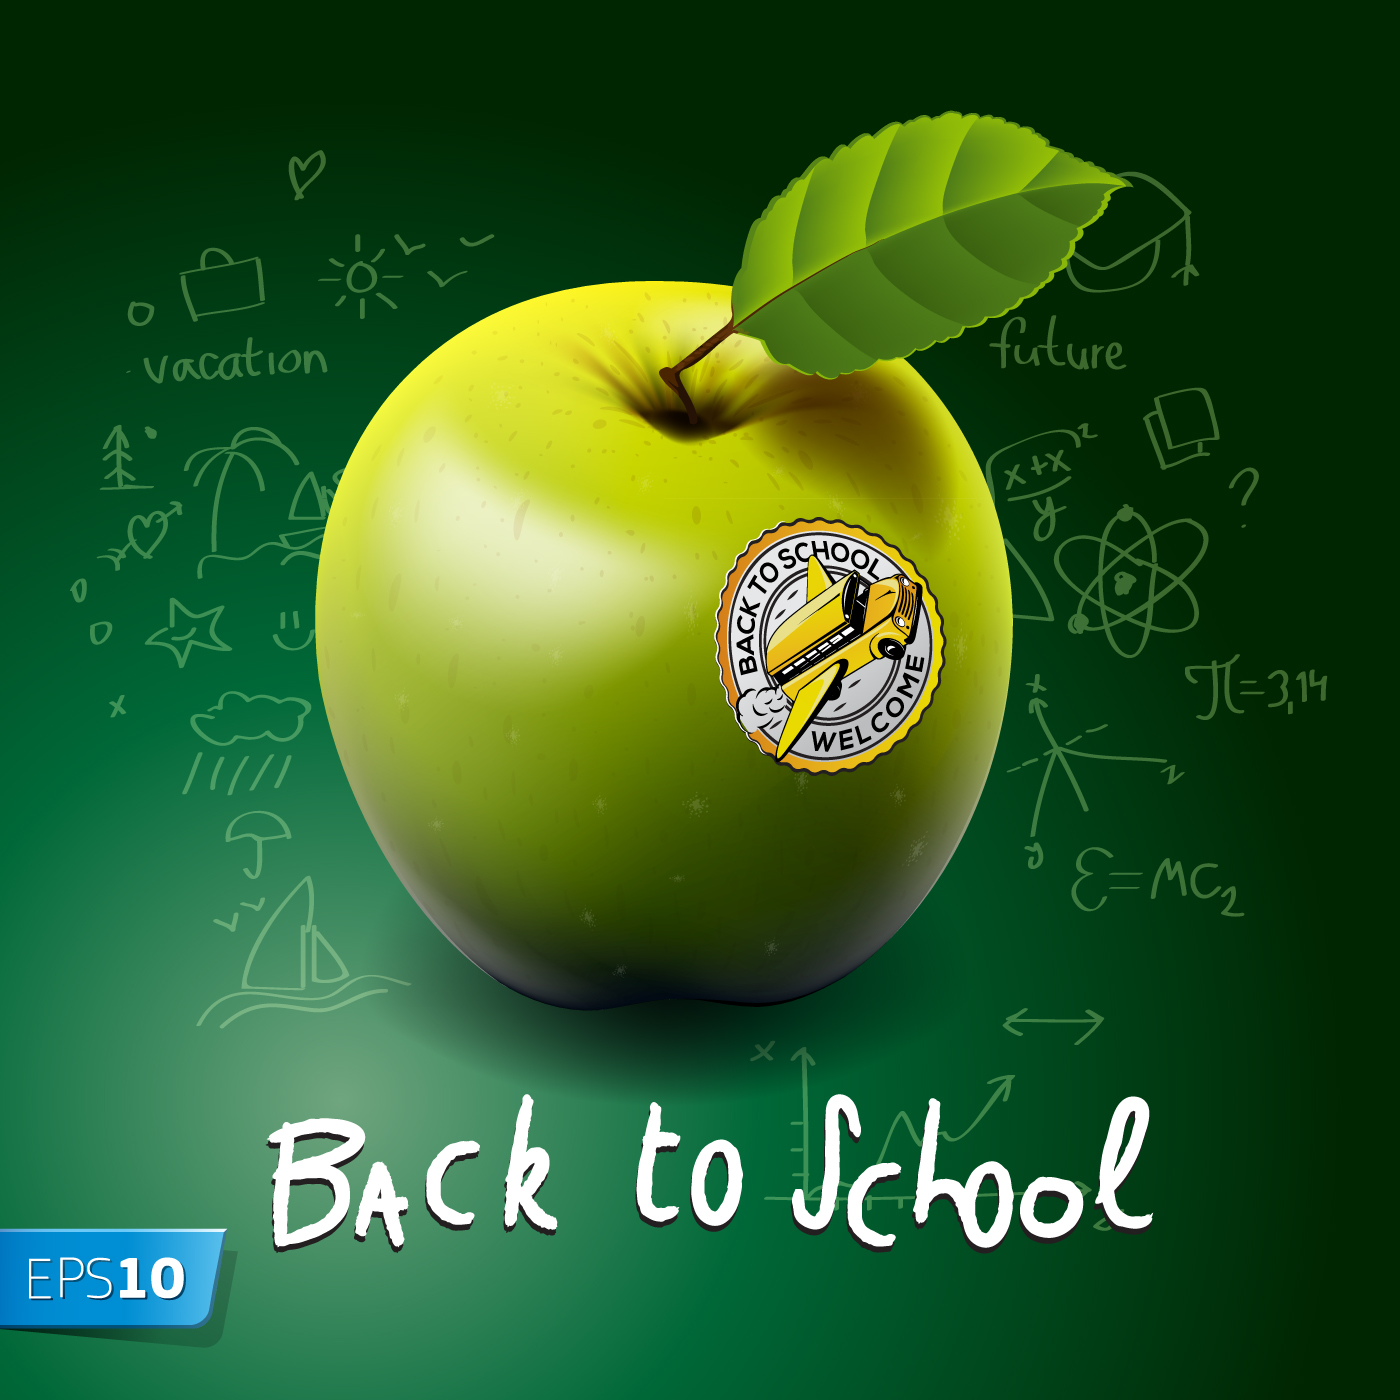 Back to School style backgrounds 03 school backgrounds background   